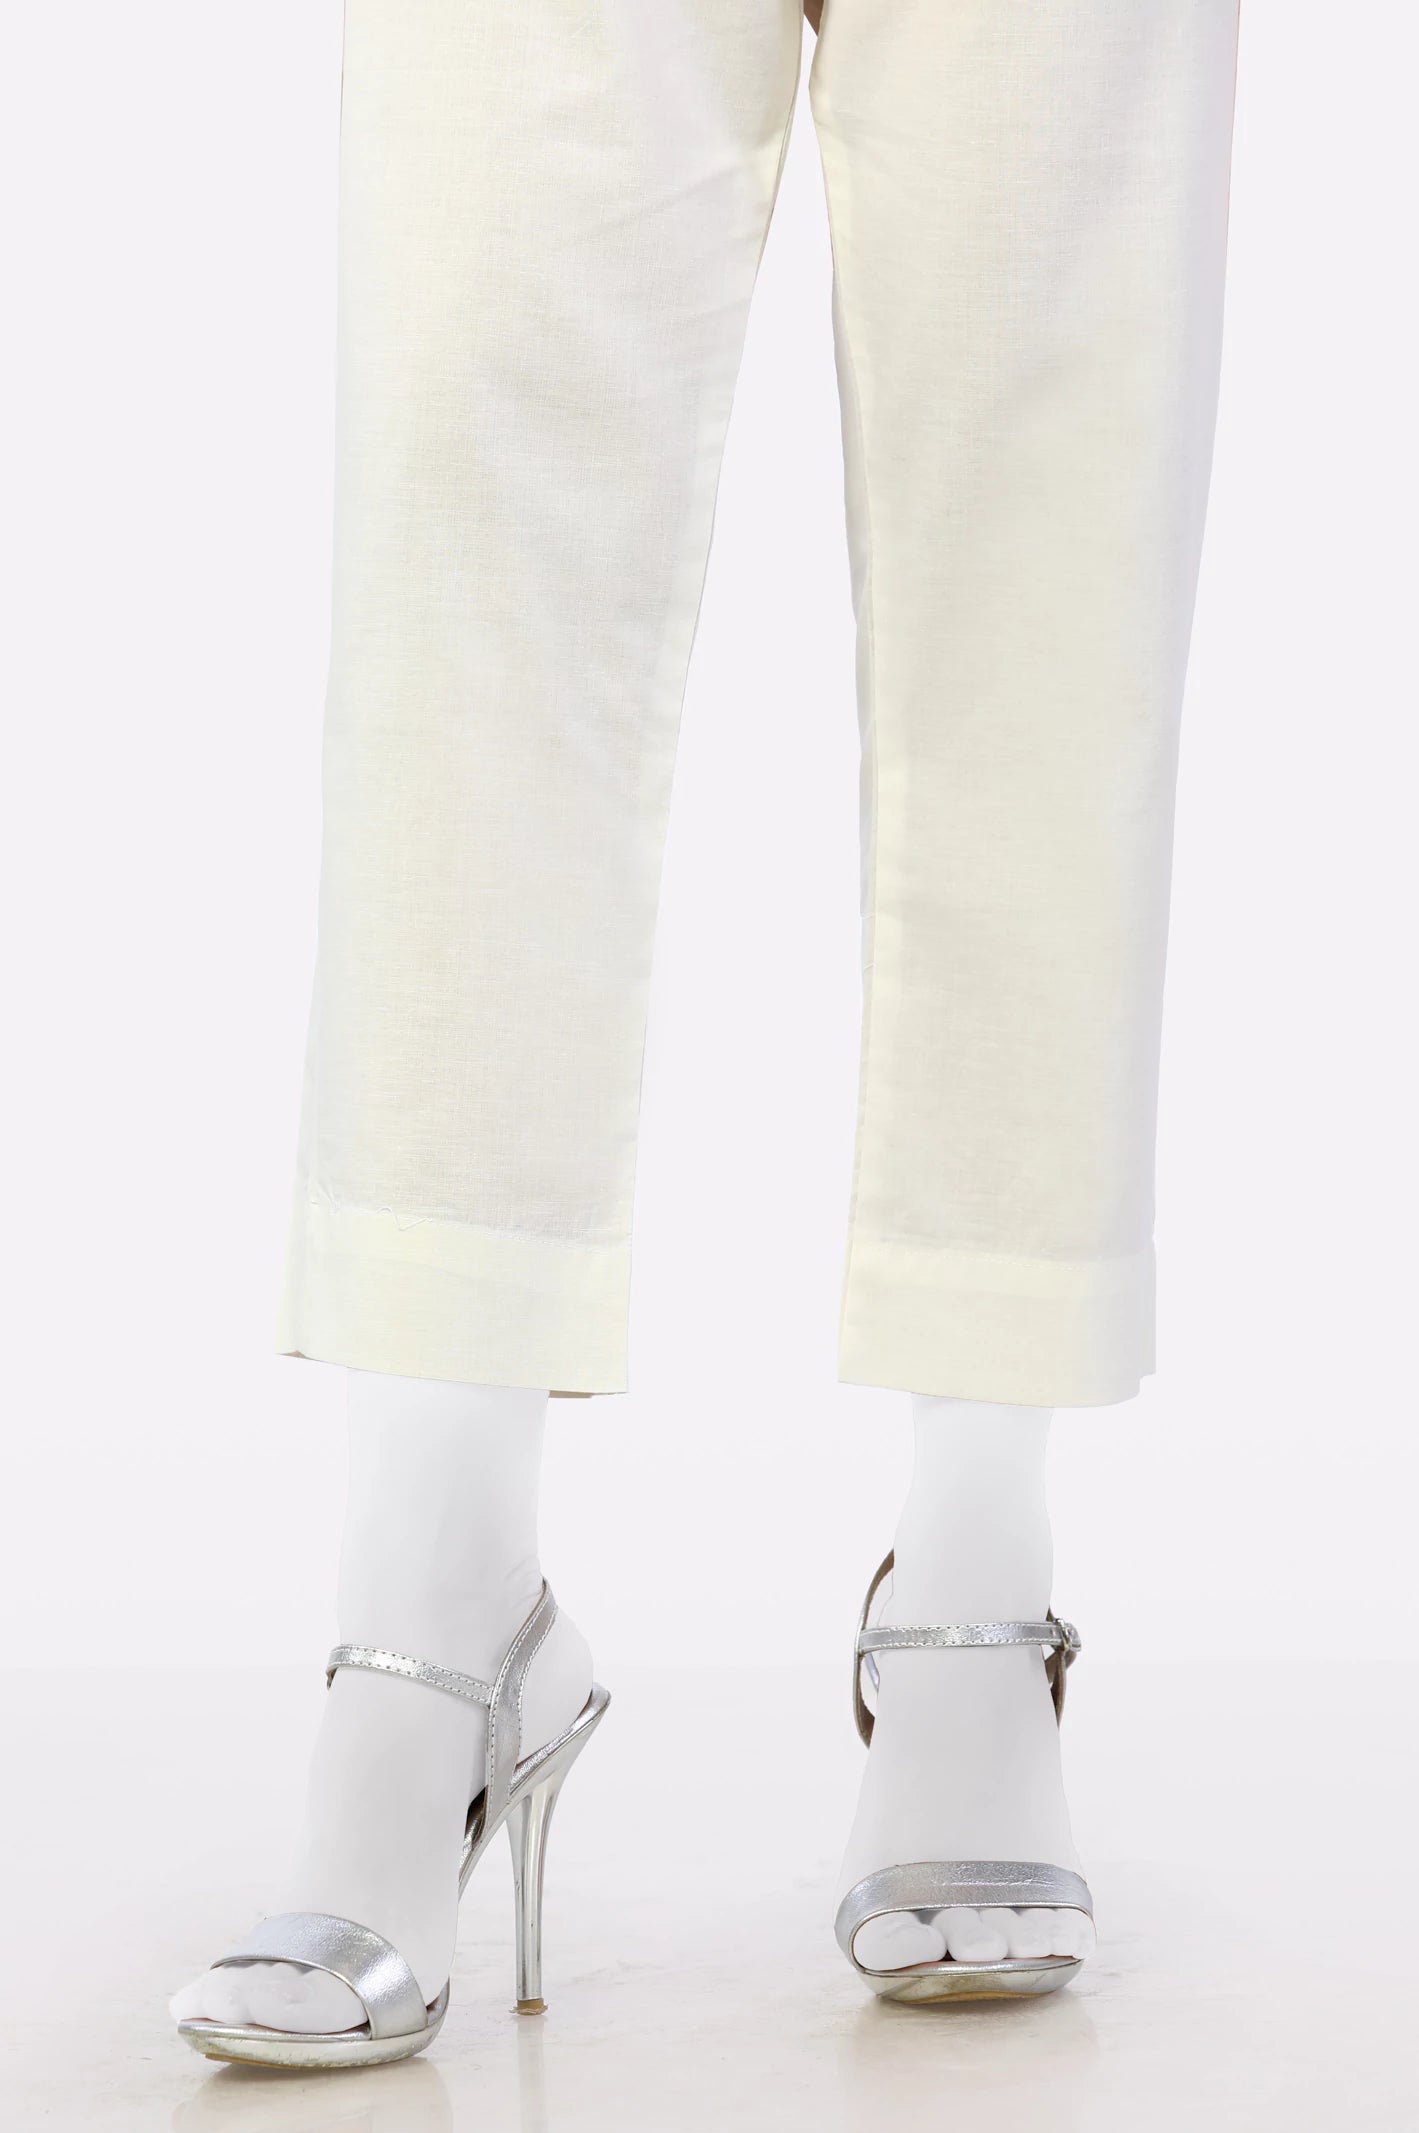 CreamTrouser From Diners